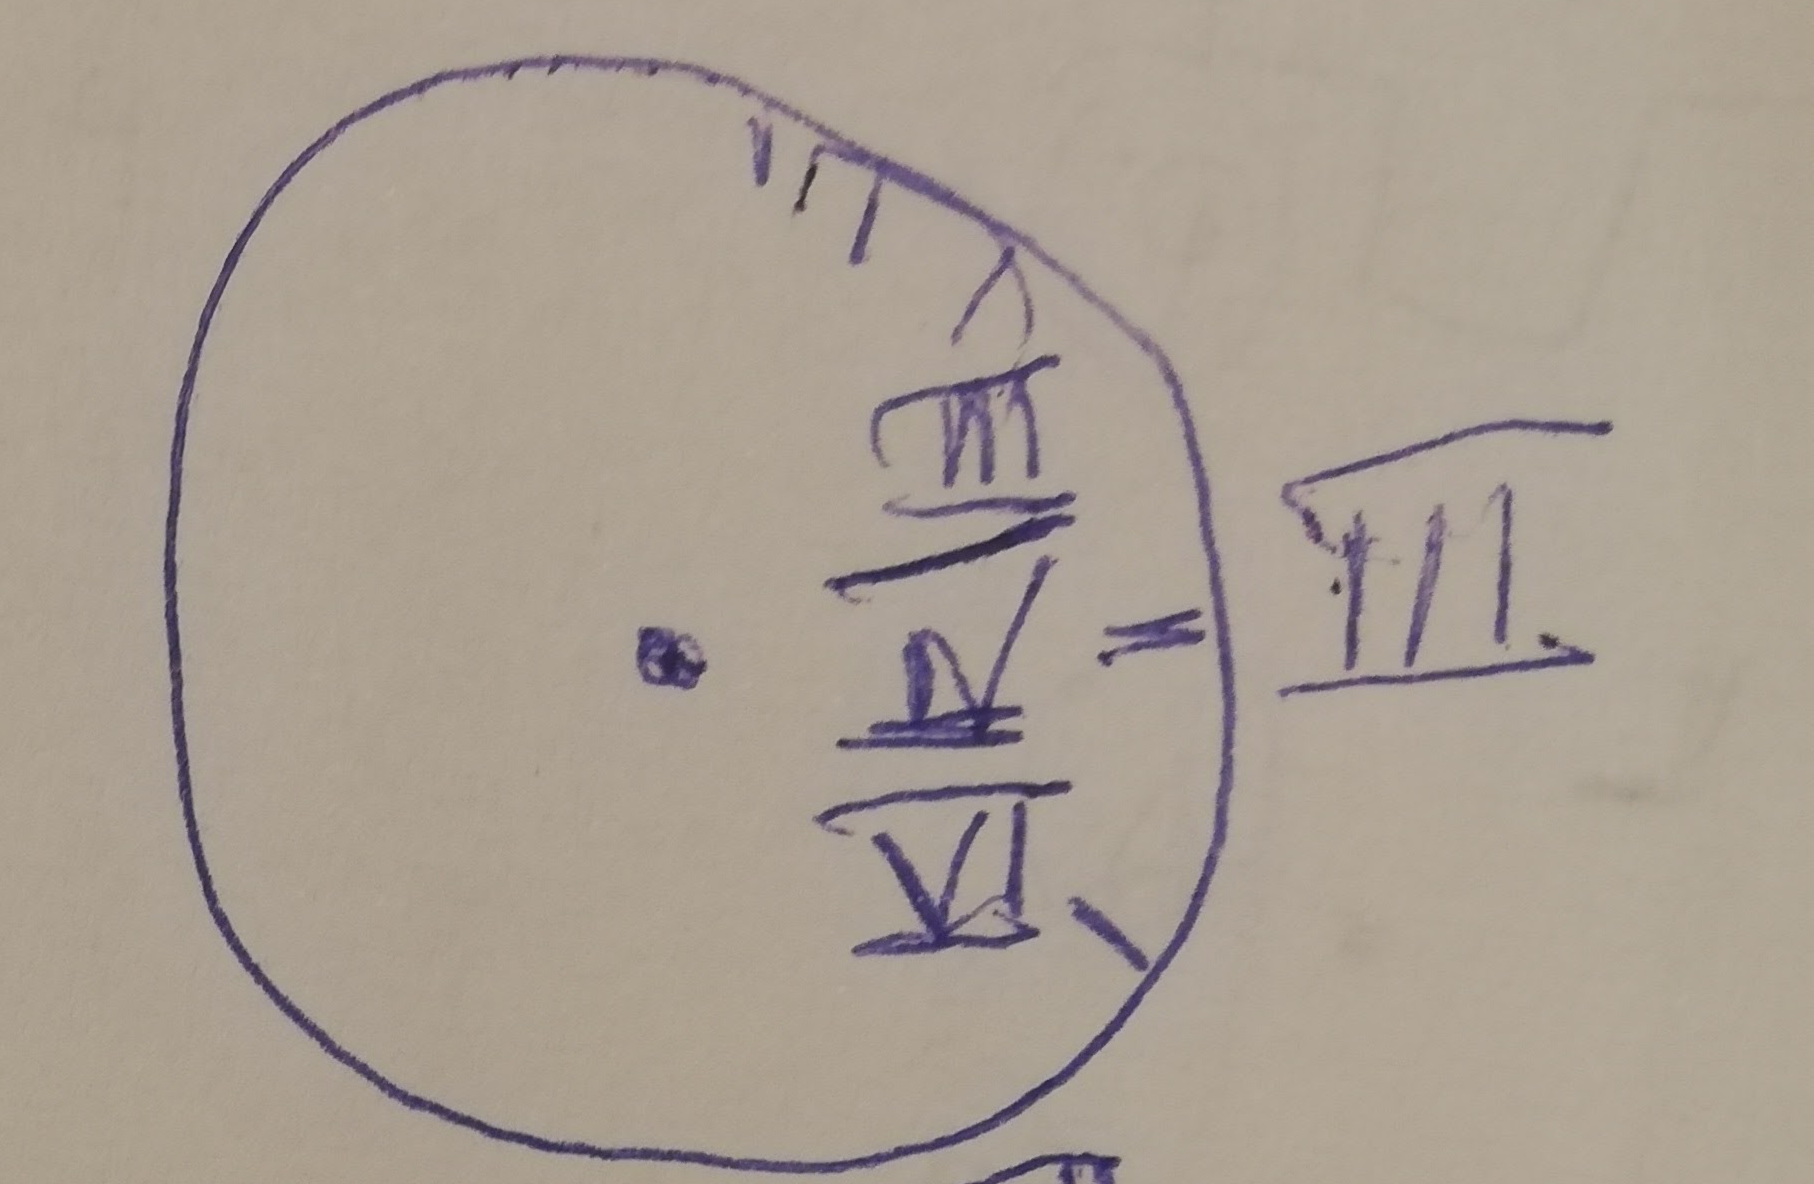 When I tried to draw a clock, I only drew its right side